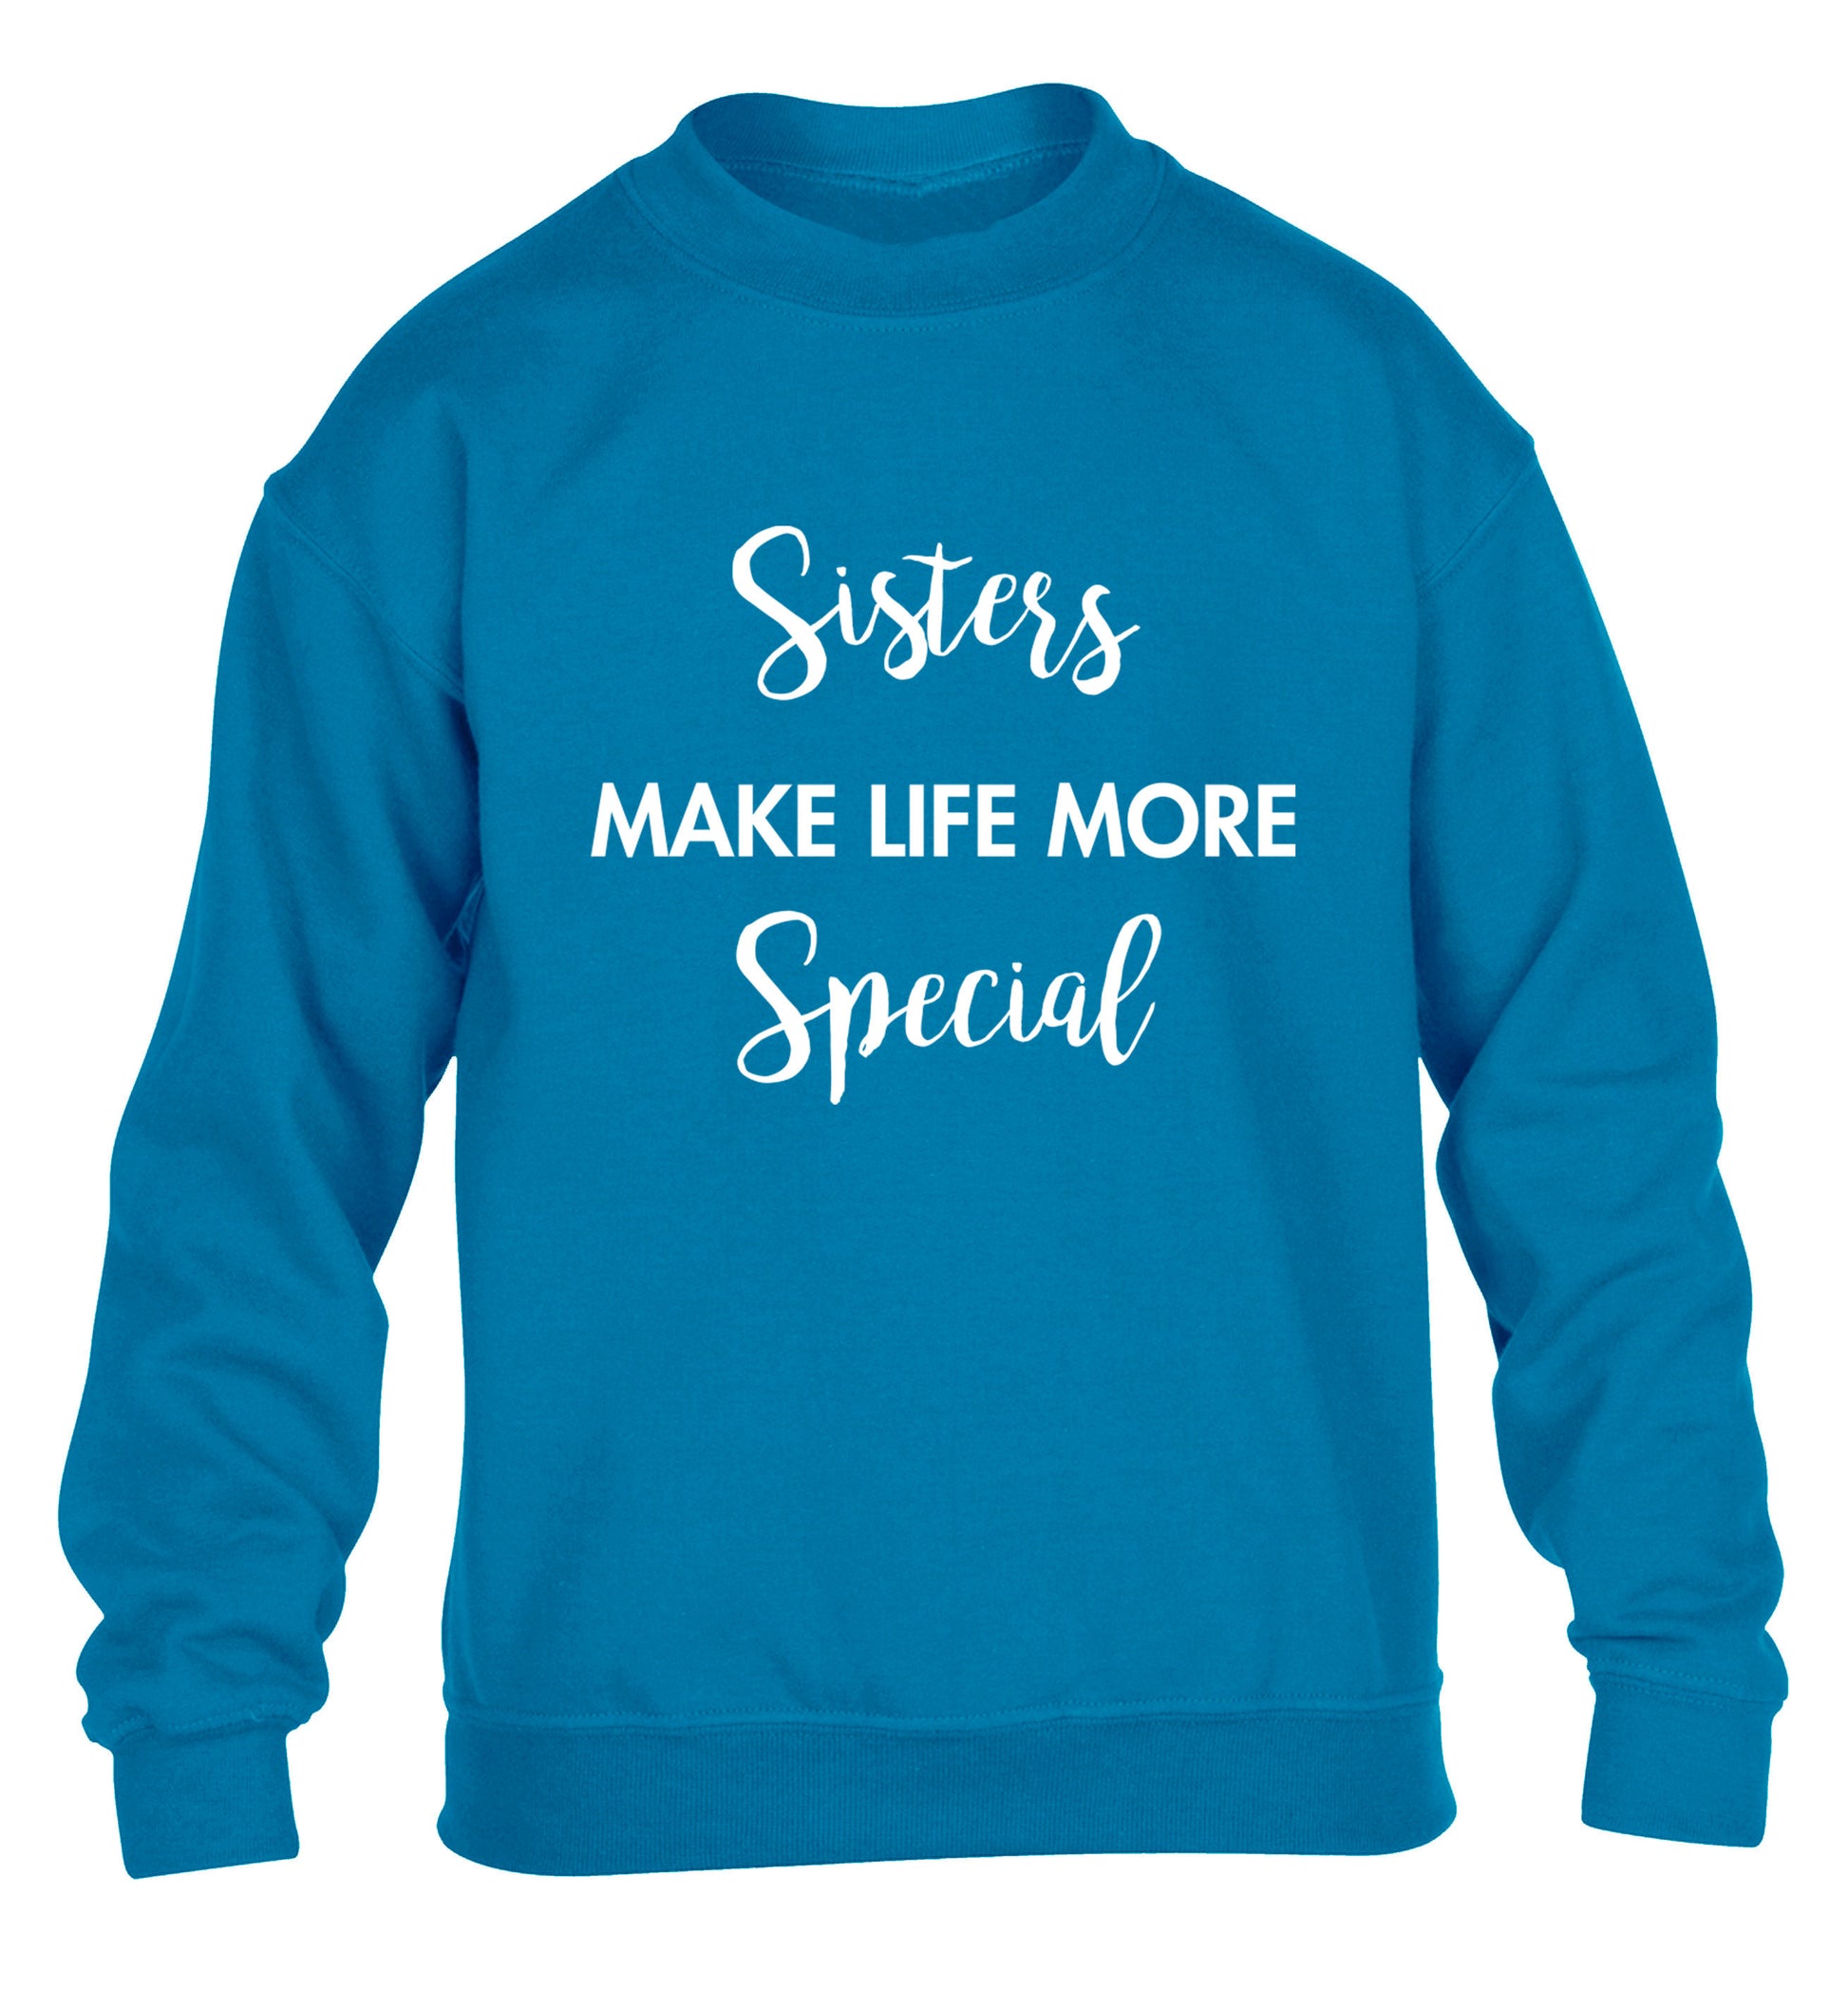 Sisters make life more special children's blue sweater 12-14 Years